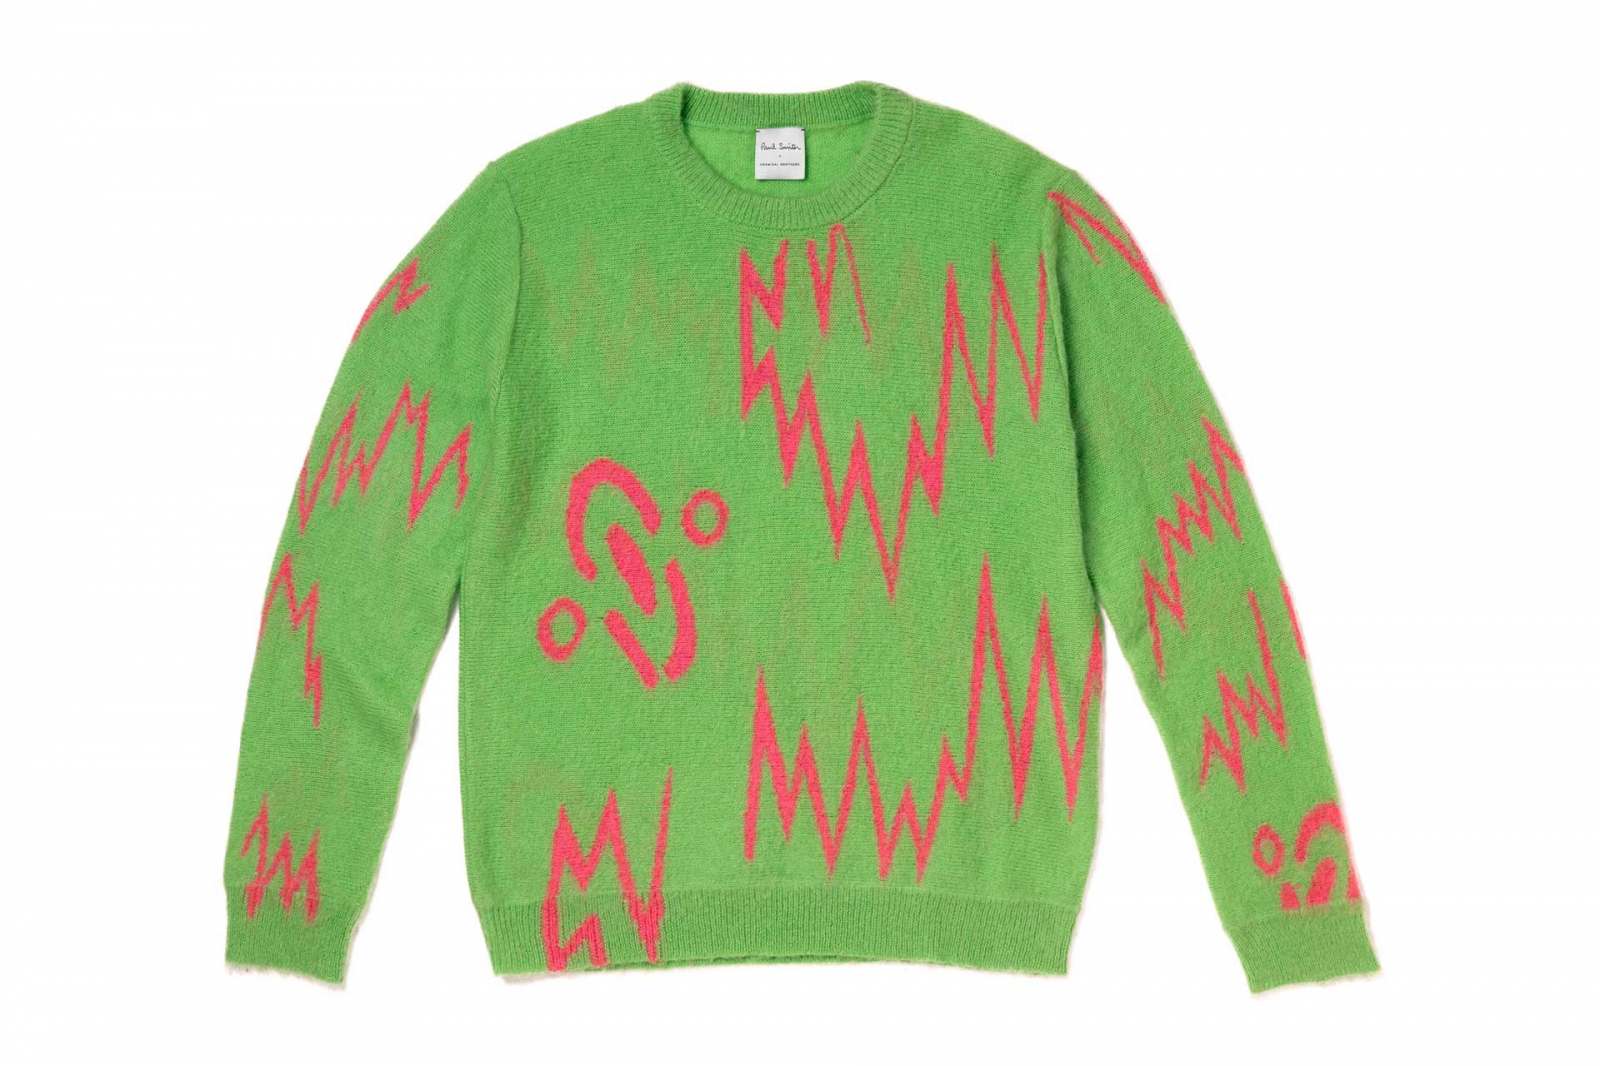 Creative director and designer Tom Hingston collaborated with the Chemical Brothers on this Born in the Echoes mohair knit for Paul Smith (Photo: Paul Smith)